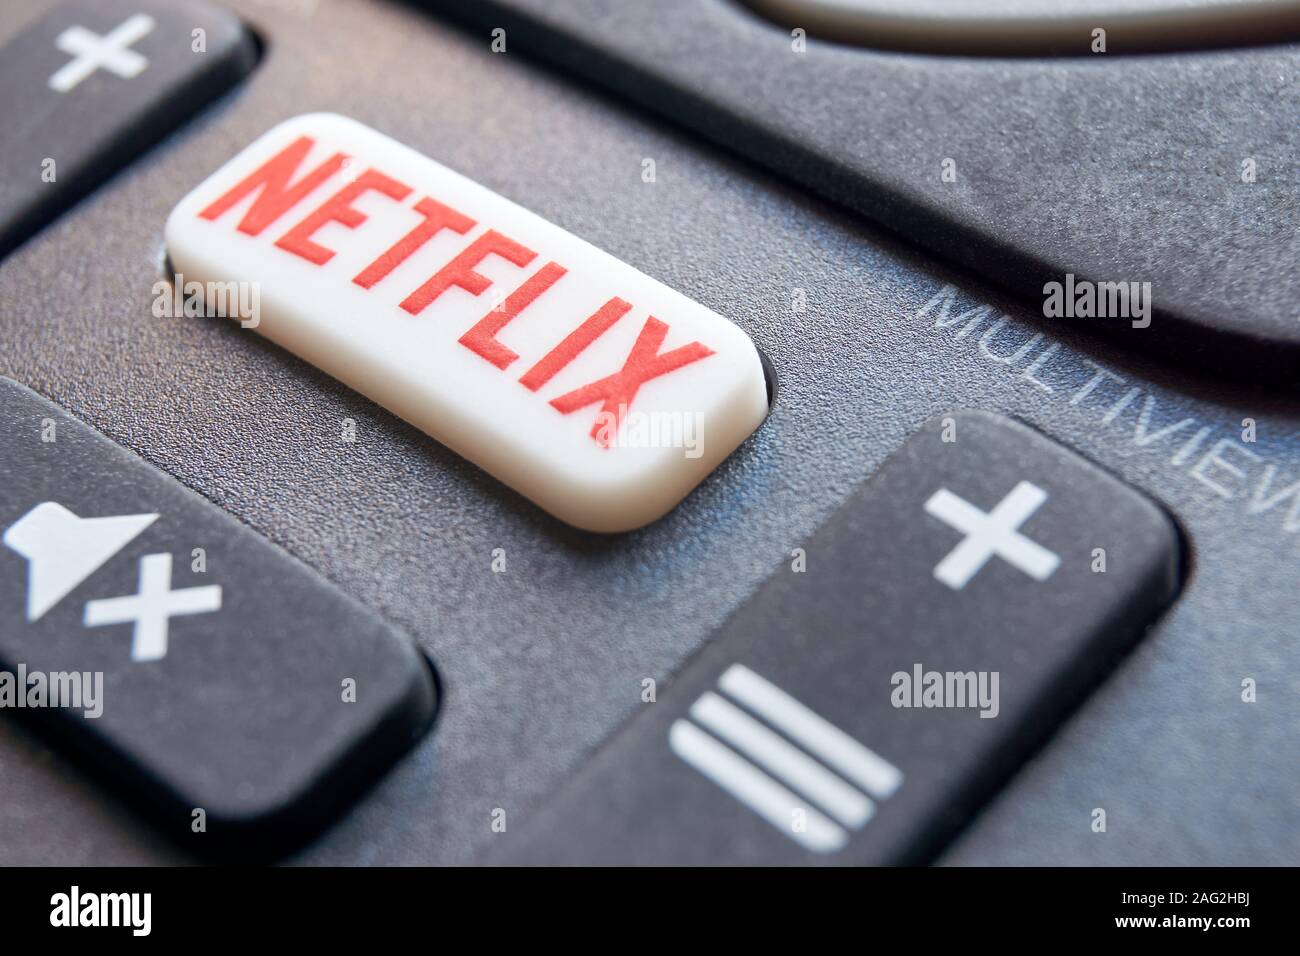 Detail of remote control with a Netflix button